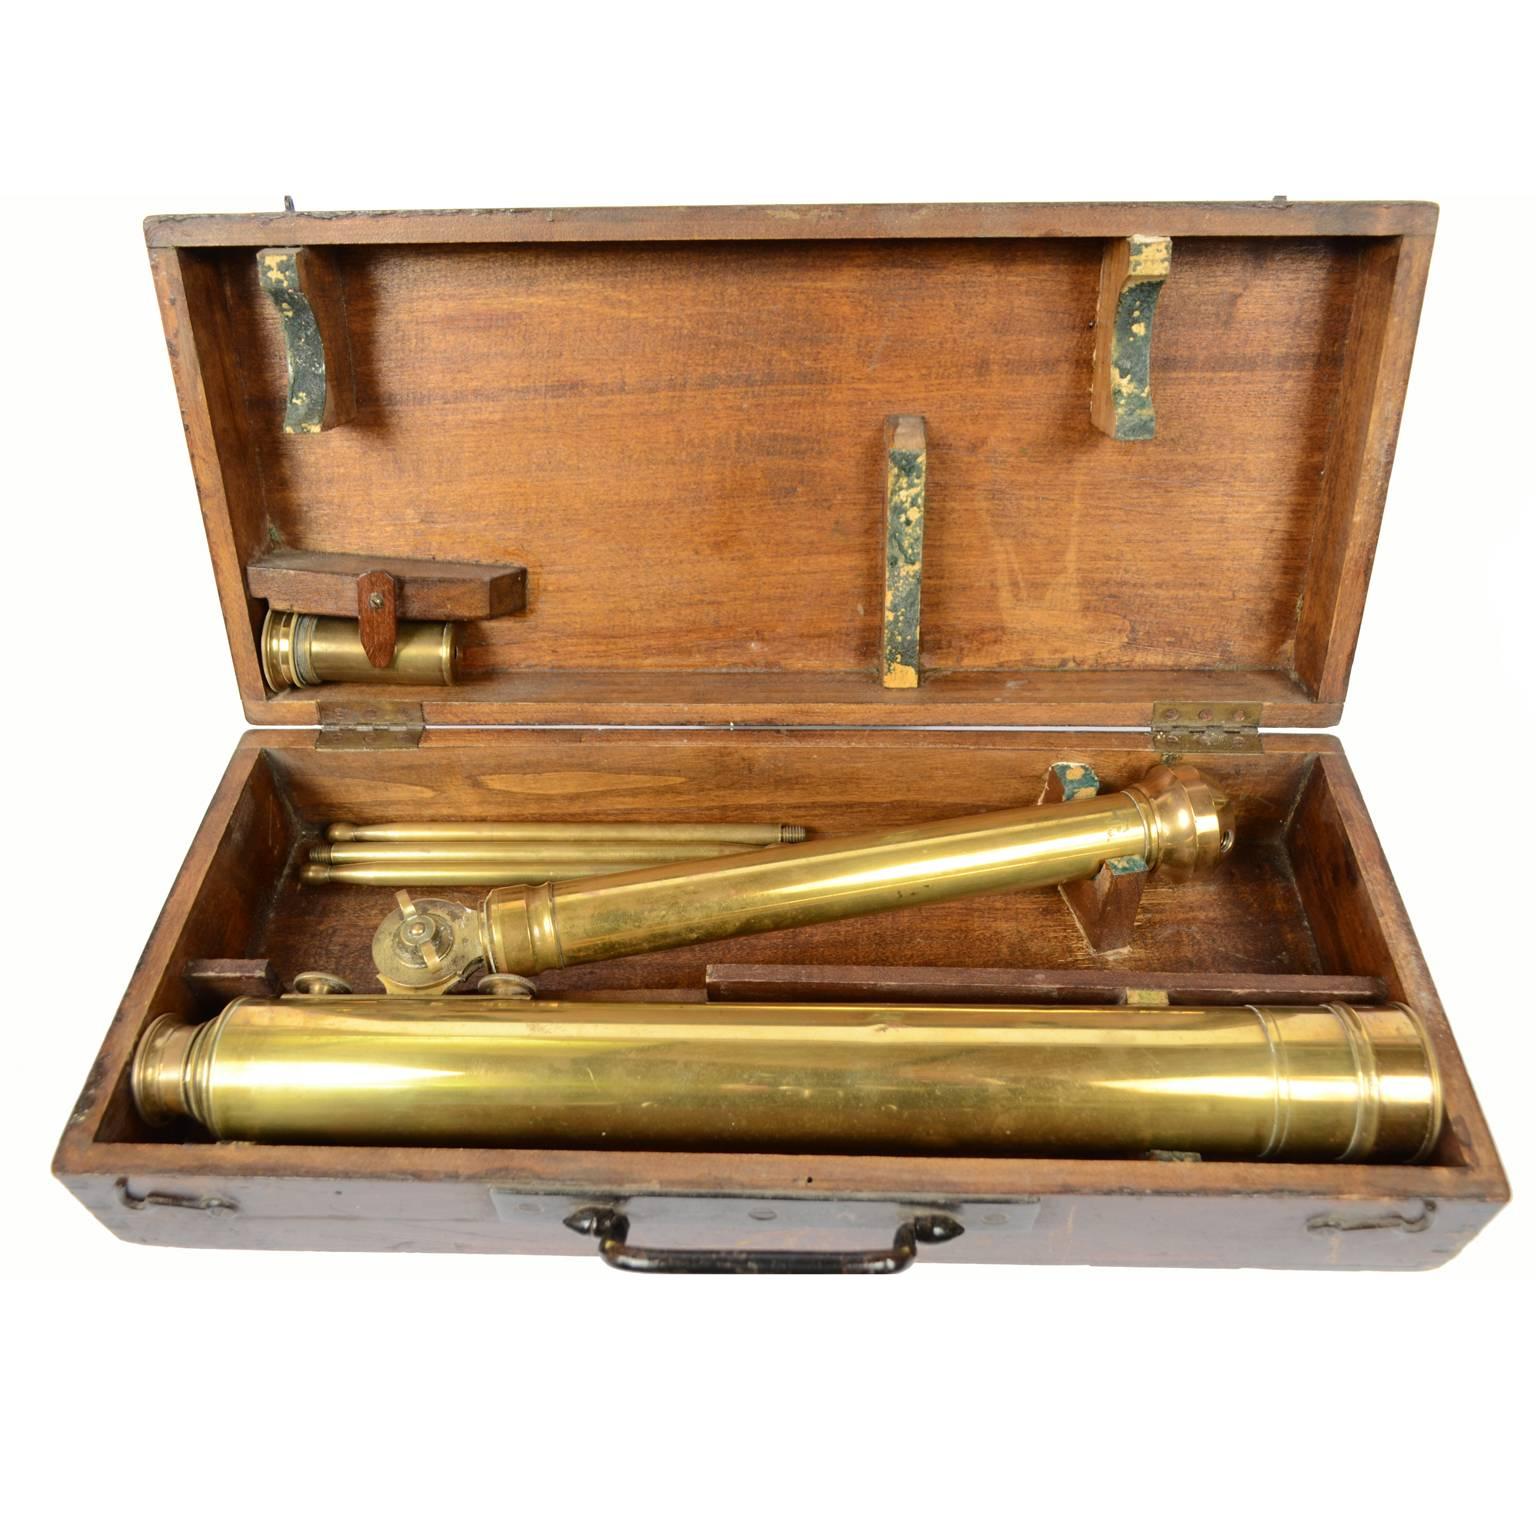 English brass telescope complete with original wooden box, second half of the 19th century. It is a telescope with two extensions and complete with a small tripod. Maximum length 74 cm, minimum 40 cm, focal diameter 4.5 cm, height 48 cm. Complete